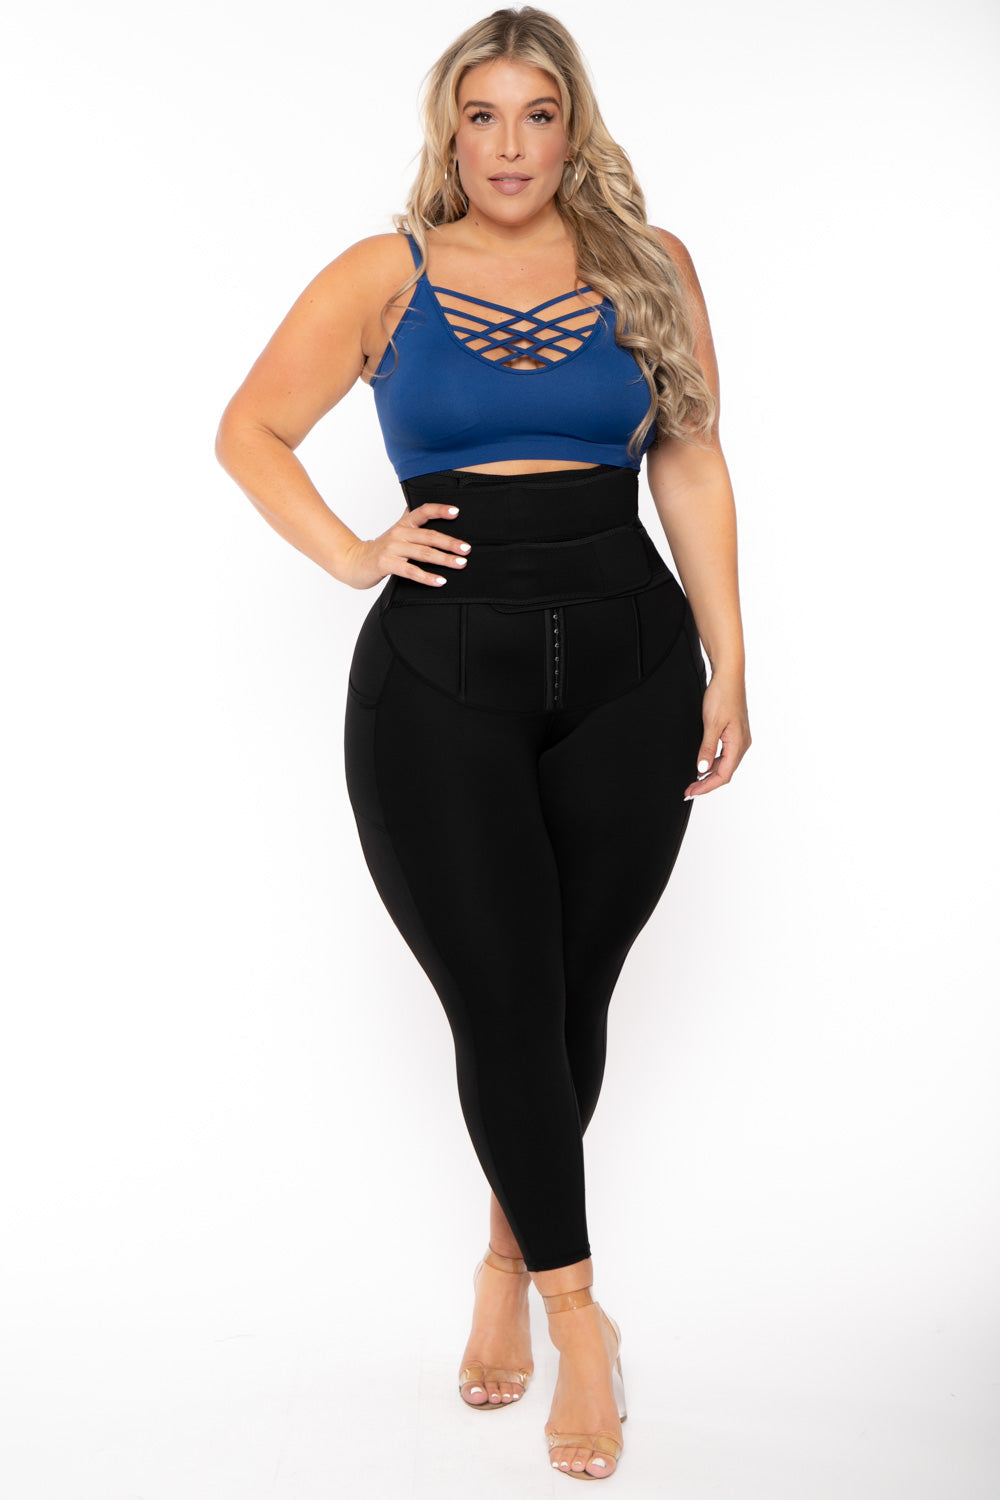 Only Play Plus Only Play Curvy workout legging in black - ShopStyle Pants